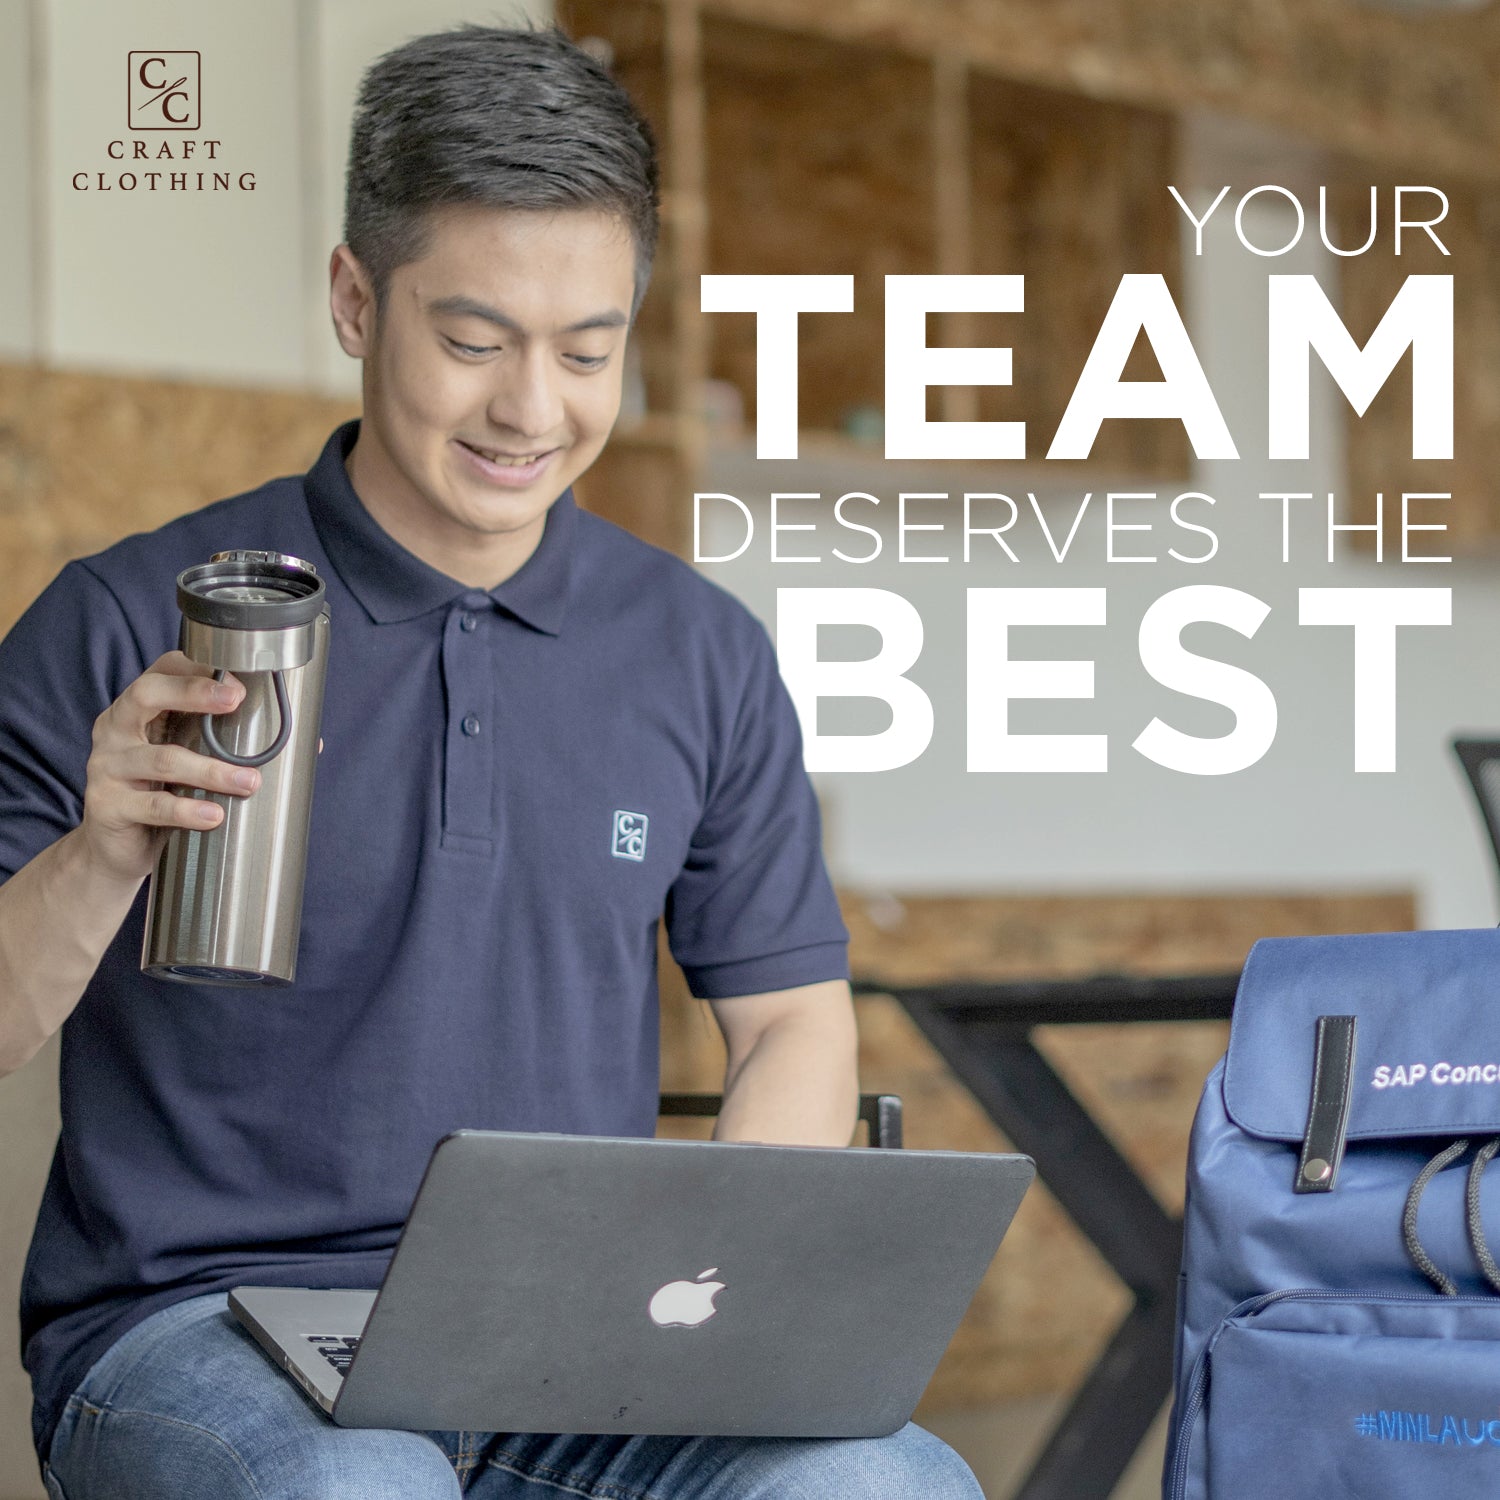 YOUR TEAM DESERVES THE BEST